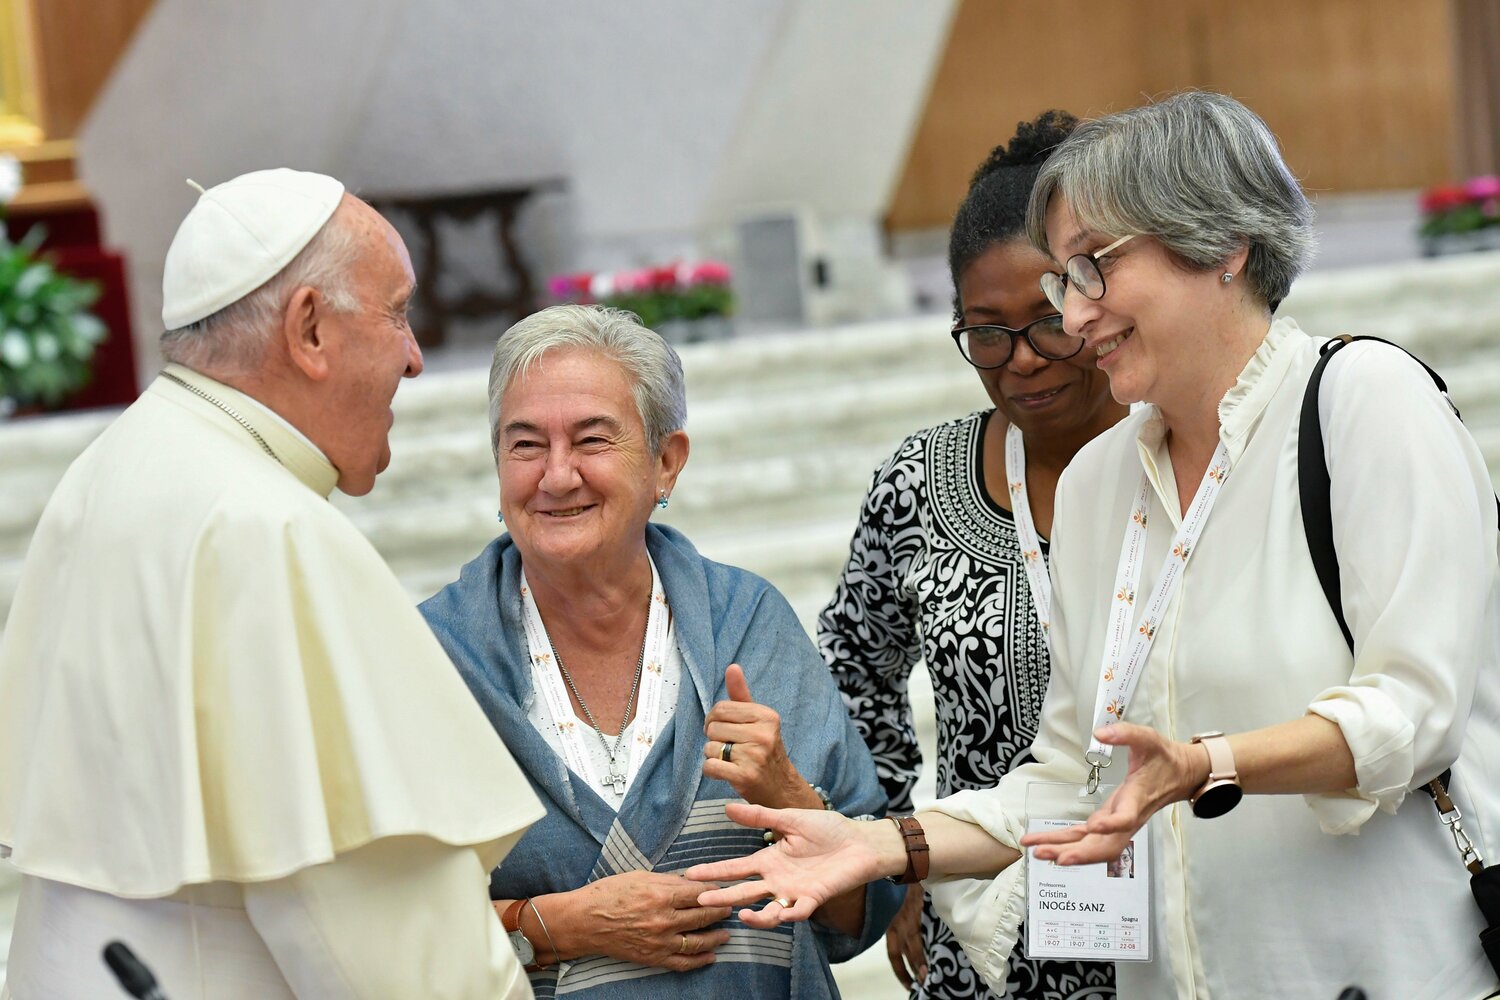 Pope Francis shares a laugh with some of the women members of the assembly of the Synod of Bishops, including Spanish theologian Cristina Inogés Sanz, left, at the assembly’s session Oct. 6, in the Paul VI Audience Hall at the Vatican.